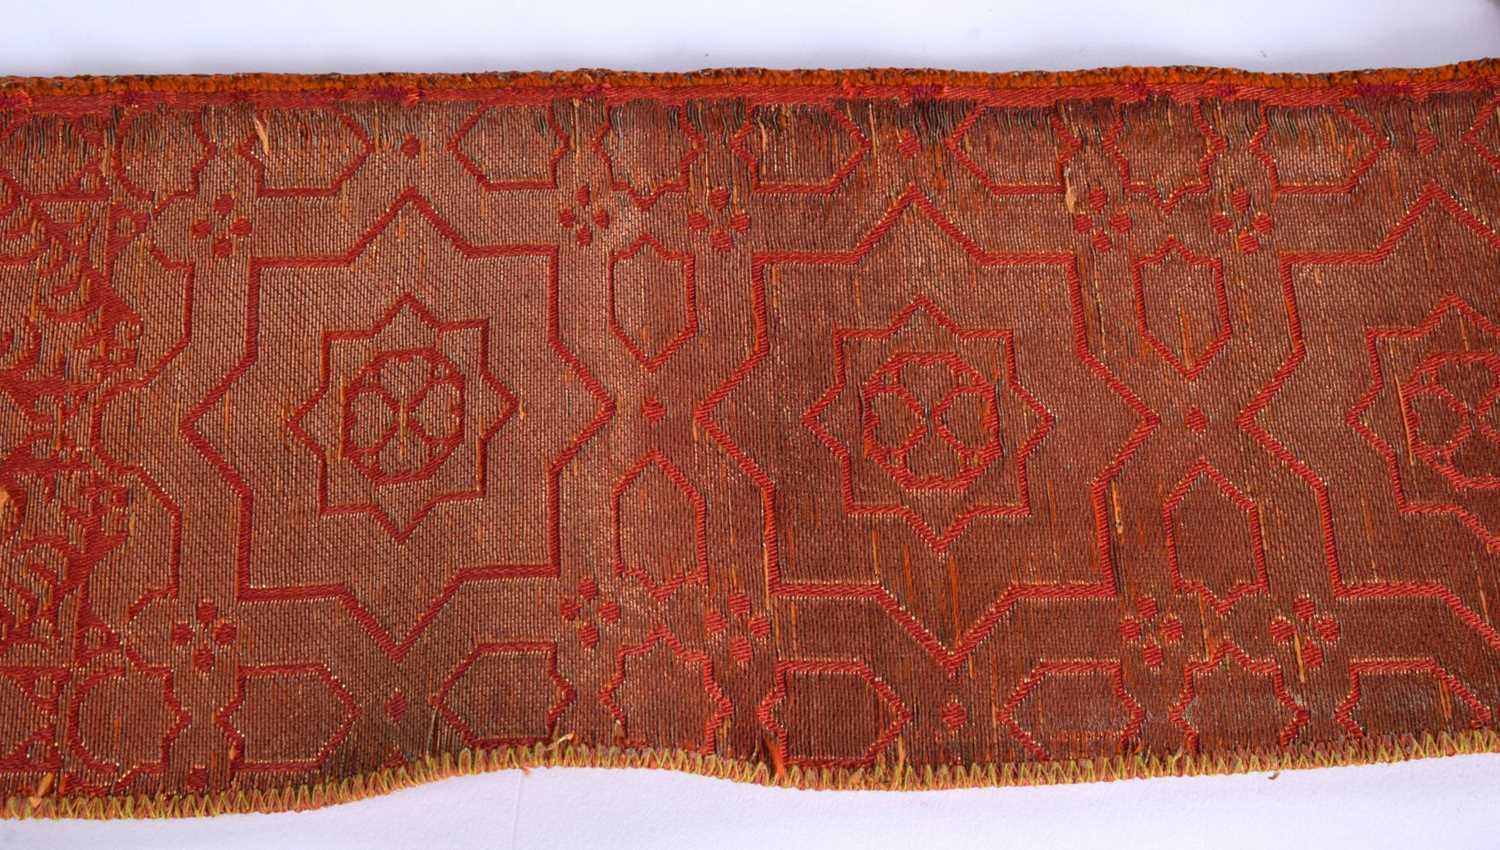 A 19TH CENTURY TURKISH ORANGE AND RED SILK EMBROIDERED BELT decorated with gold motifs. 280 cm - Image 7 of 8